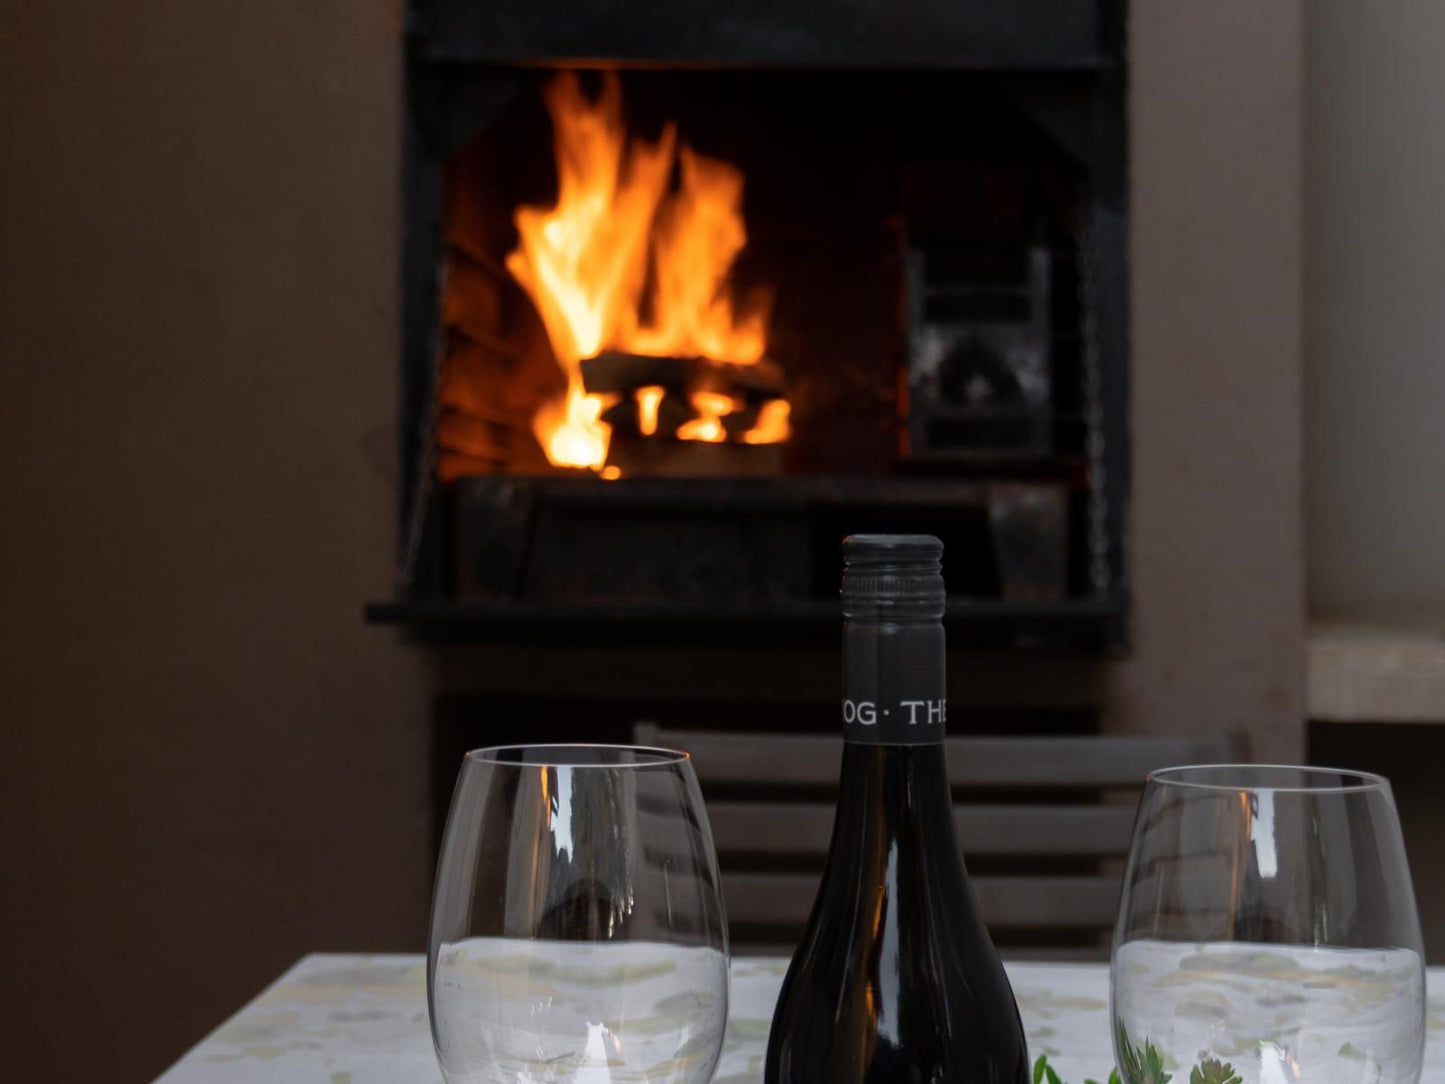 Falls Guest House Augrabies Falls Augrabies Northern Cape South Africa Fire, Nature, Fireplace, Wine, Drink, Wine Glass, Glass, Drinking Accessoire